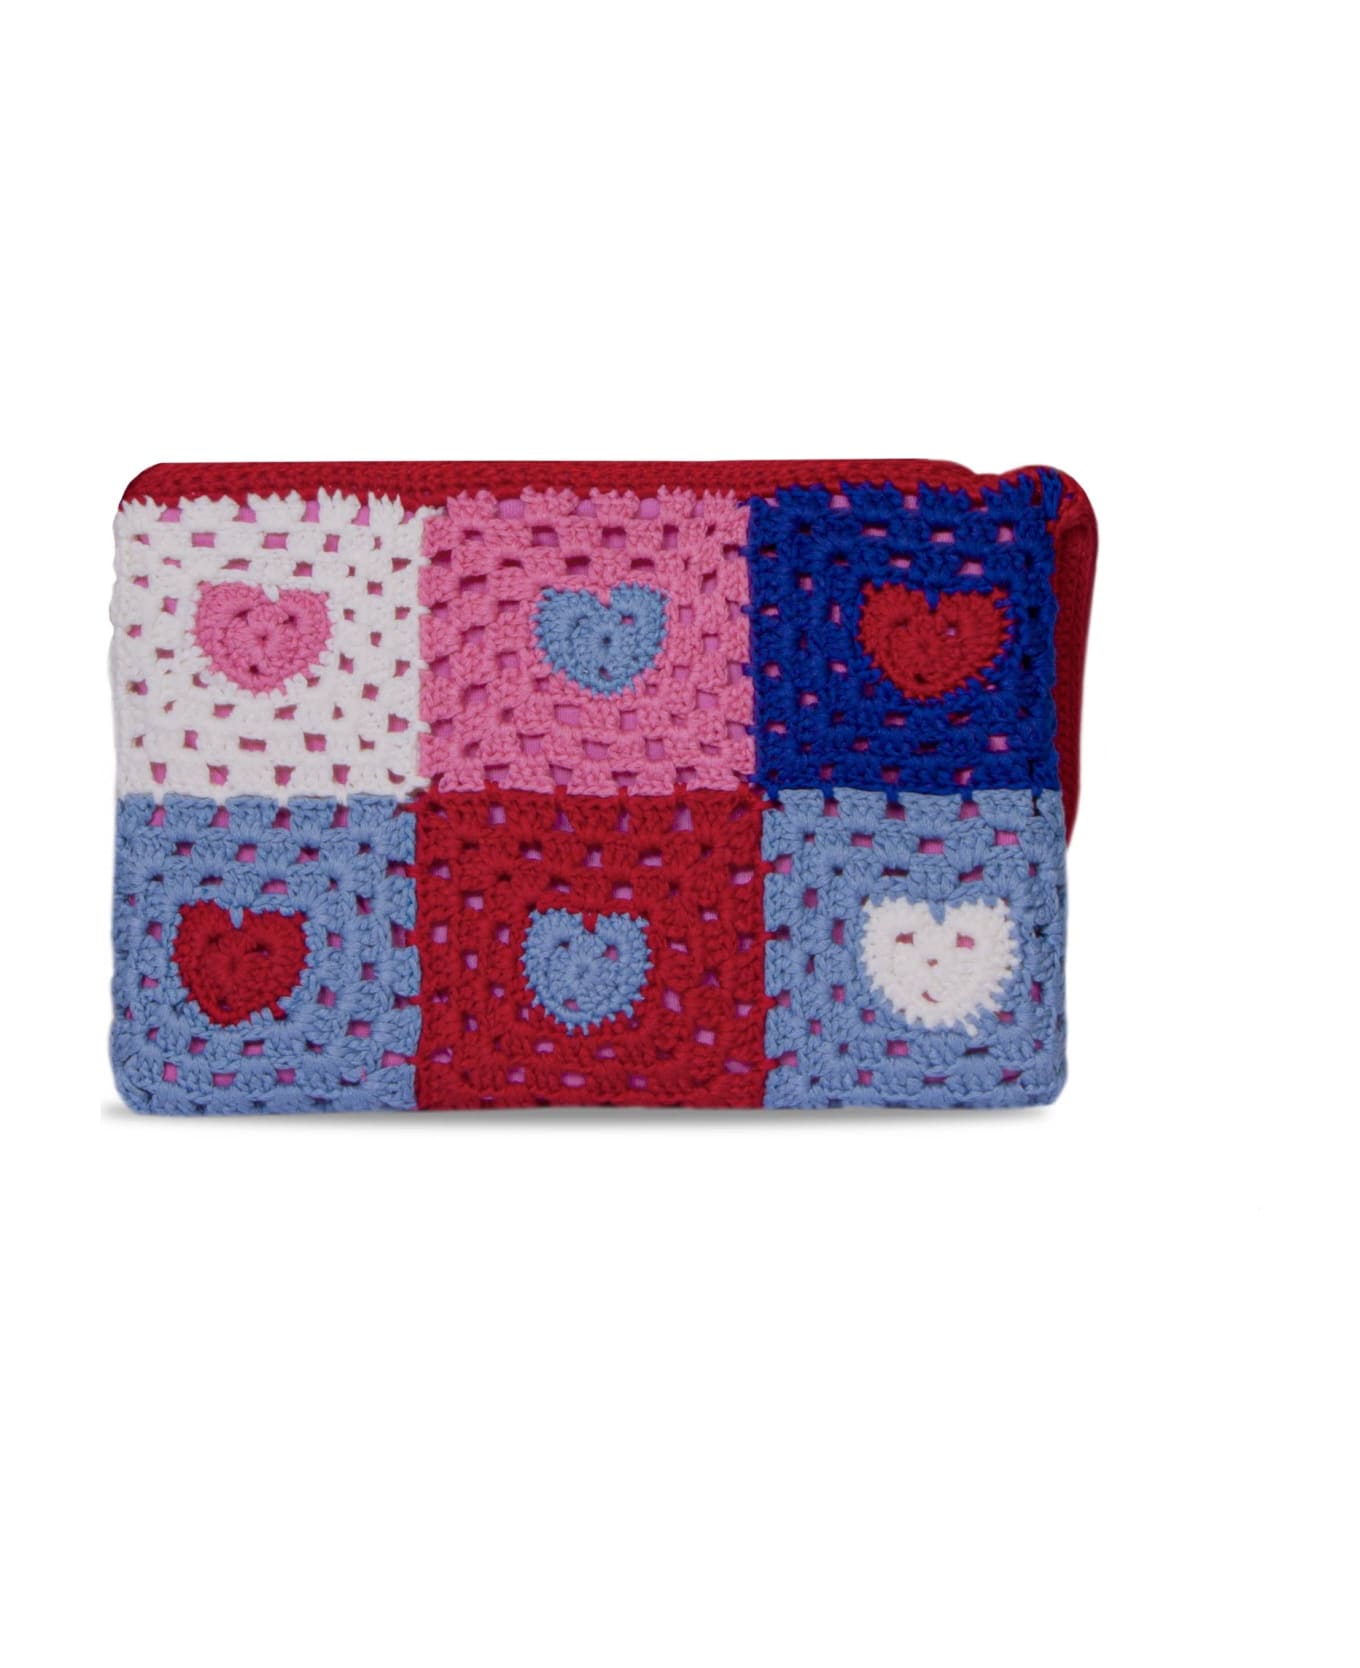 MC2 Saint Barth Parisienne Crochet Pouch Bag With Heart Embroidery - RED トラベルバッグ